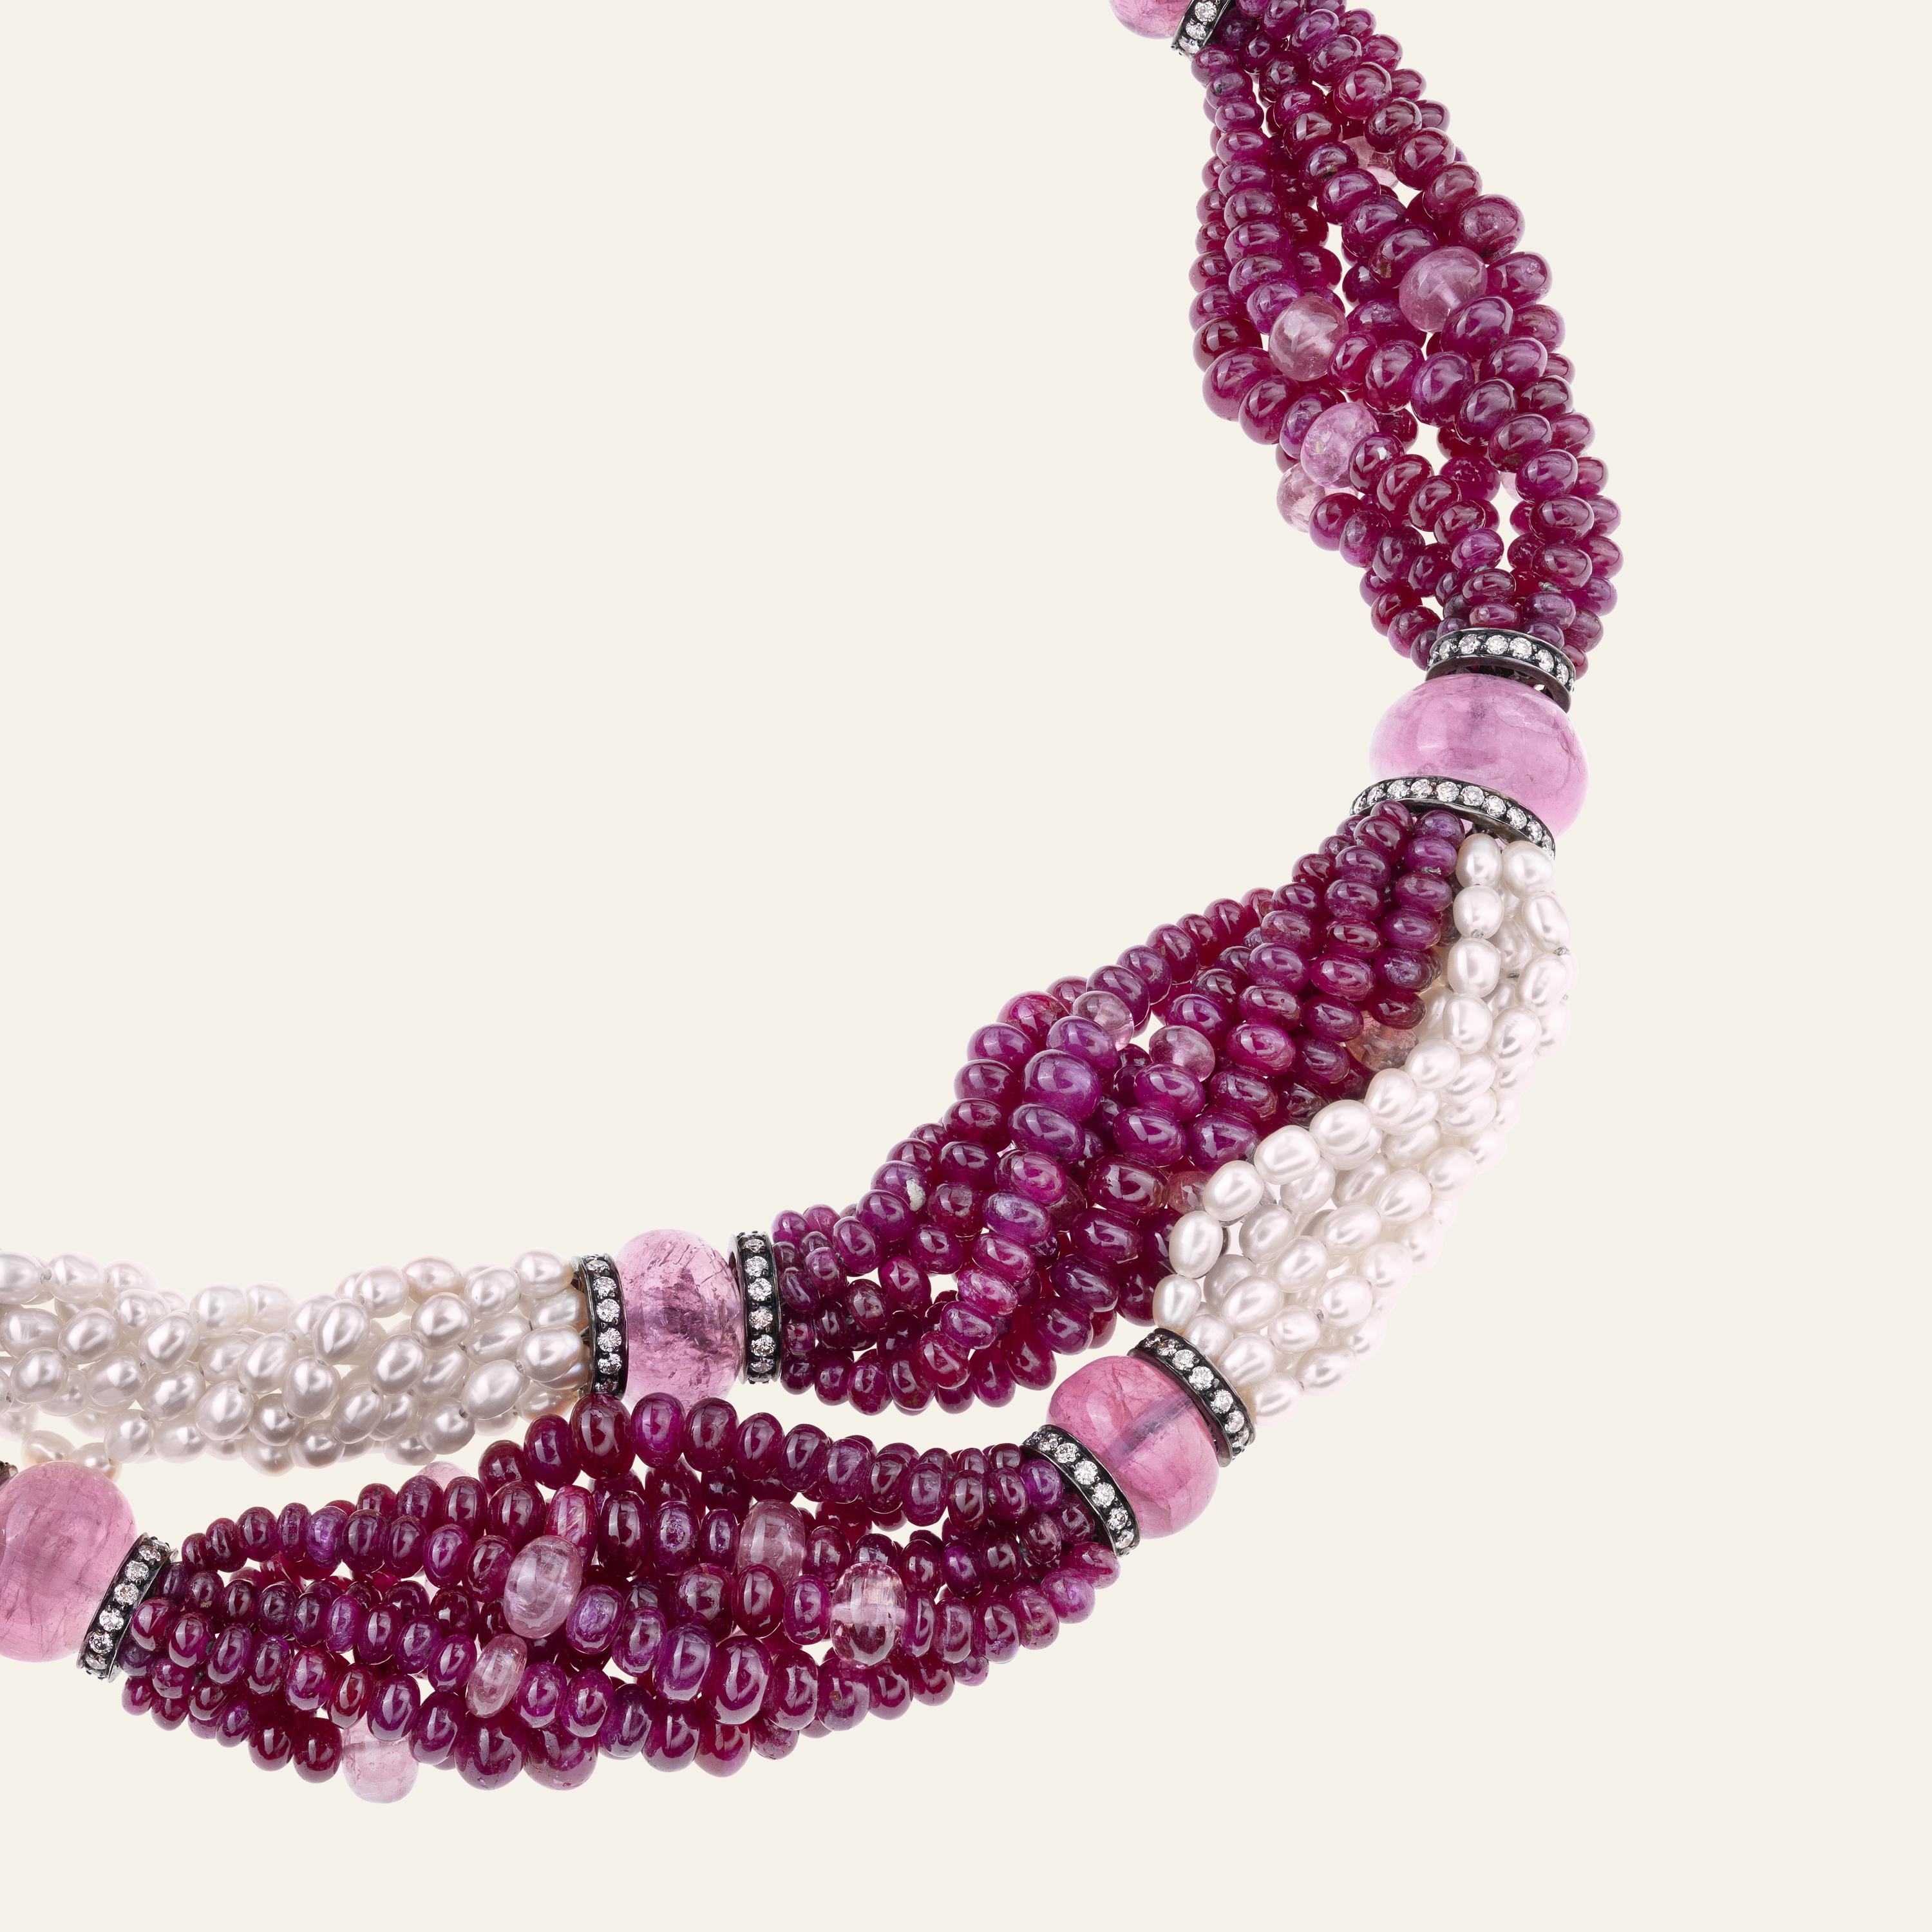 Sabbadini Pearl and Rubies Beaded Chocker Necklace 
Twisted bead necklace, fresh water pink pearls, ruby beads 534,53 carats, pink tourmaline beads, round cut diamonds 4,68 carats, 18k white gold accents. 
Handmade & designed in Milan, in Via